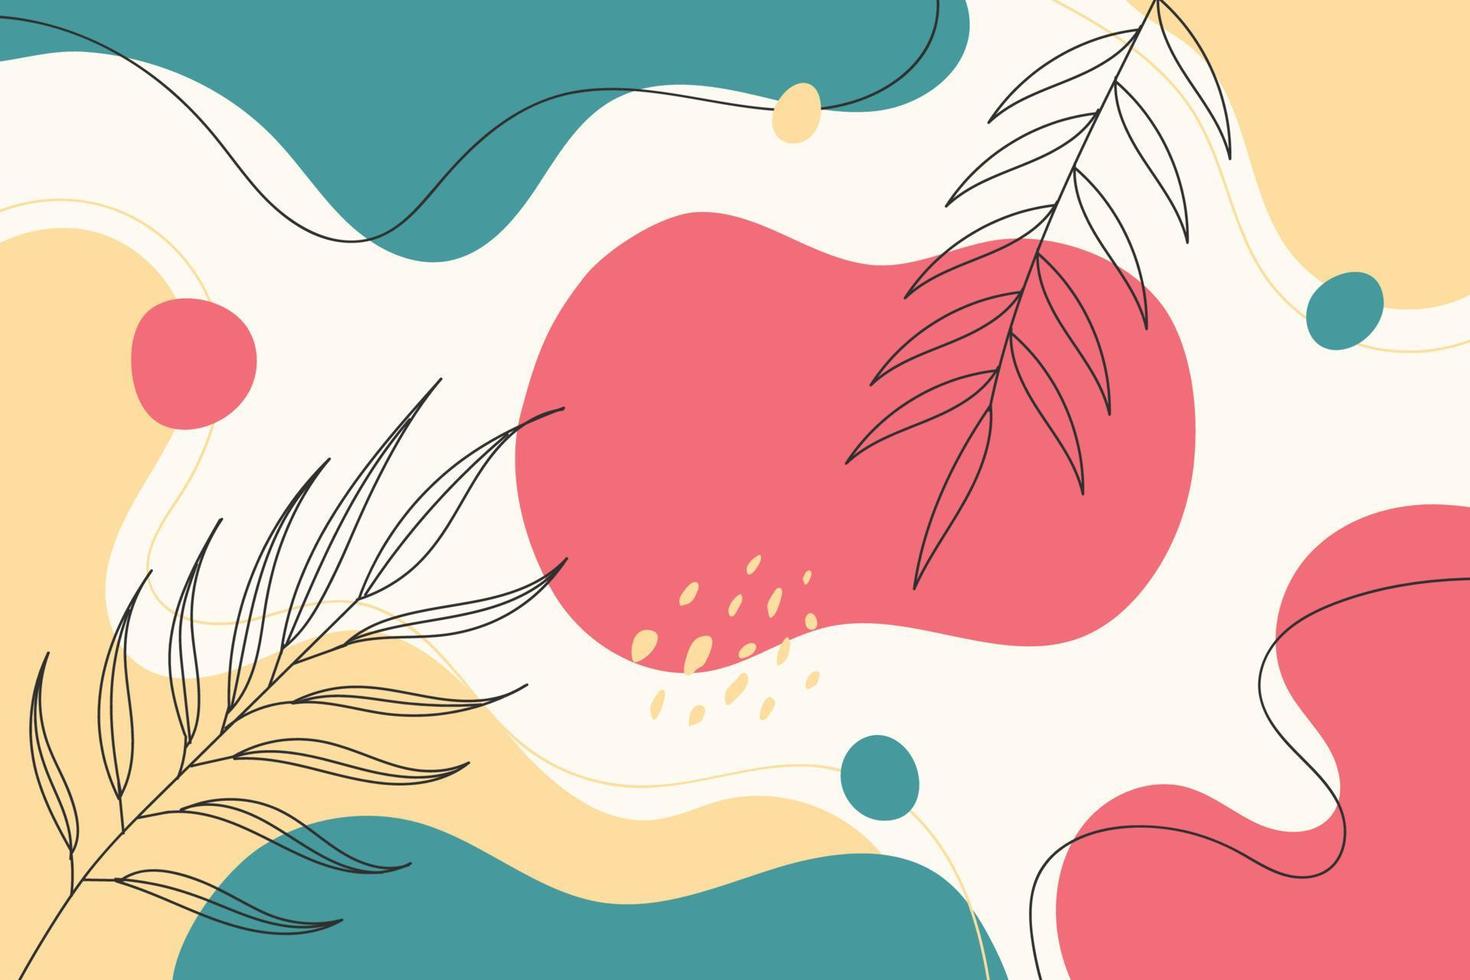 Hand drawn abstract design background with pastel colors and plant ornament. Vector illustration.